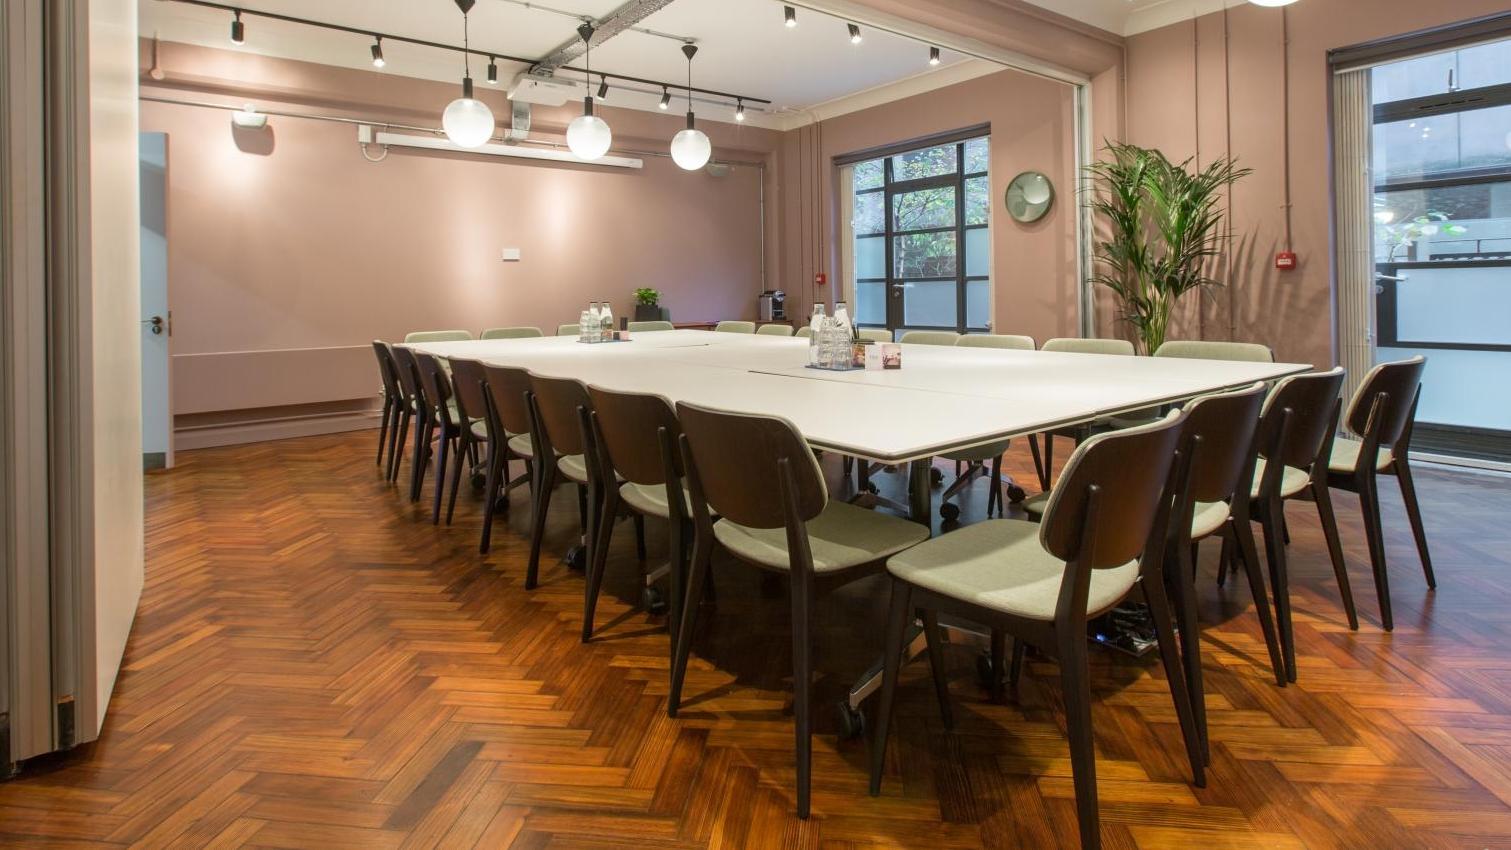 Meeting Rooms for Hire in Liverpool